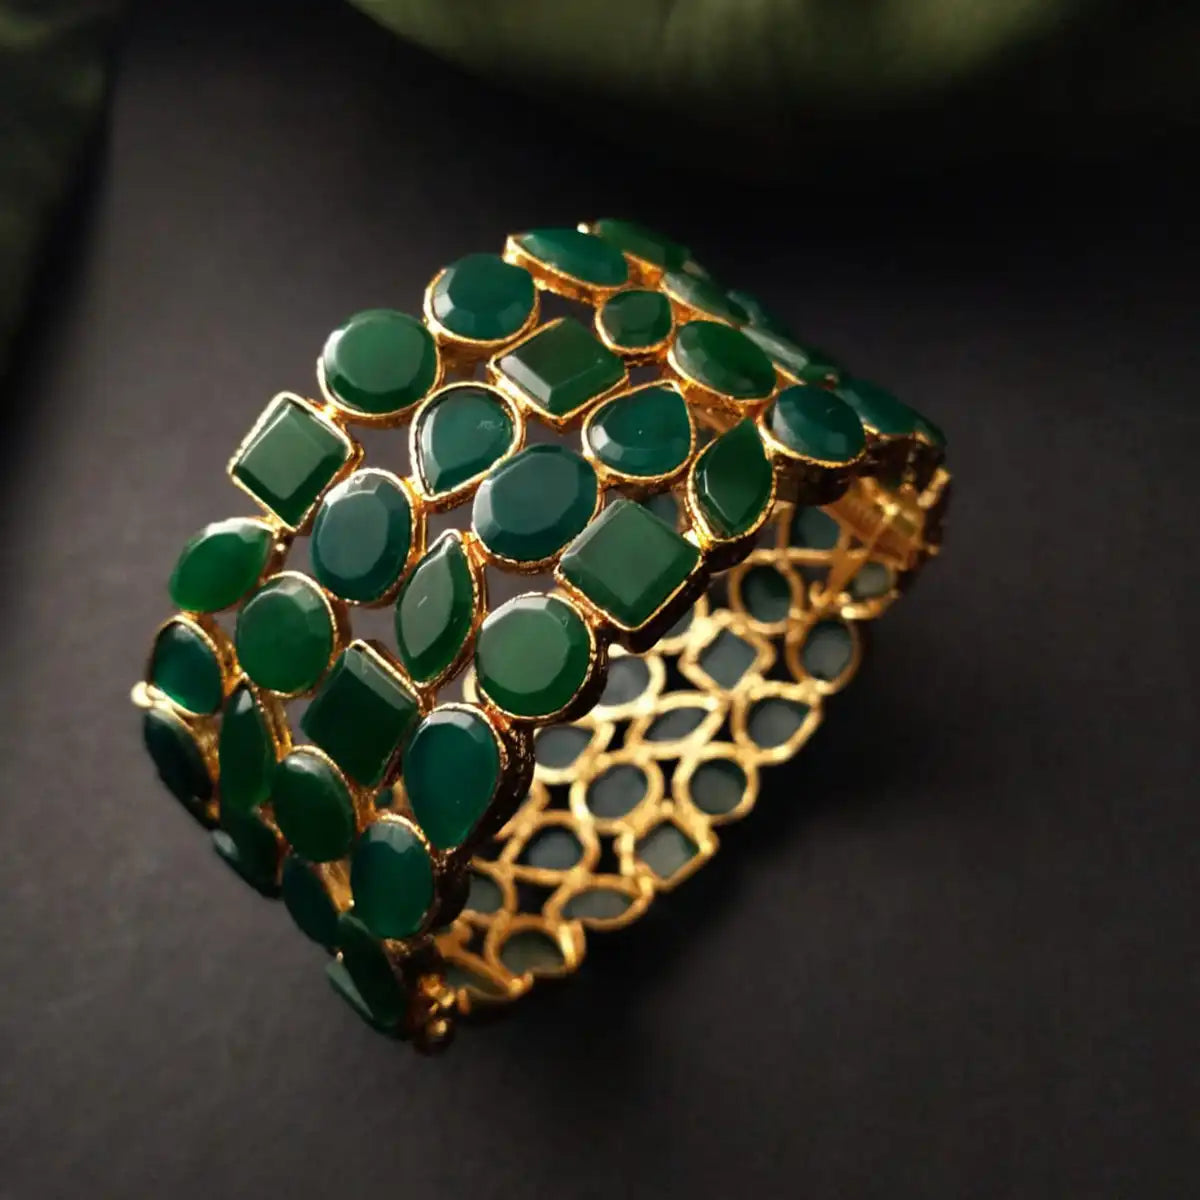 stone bangles designs with price njc-013 green